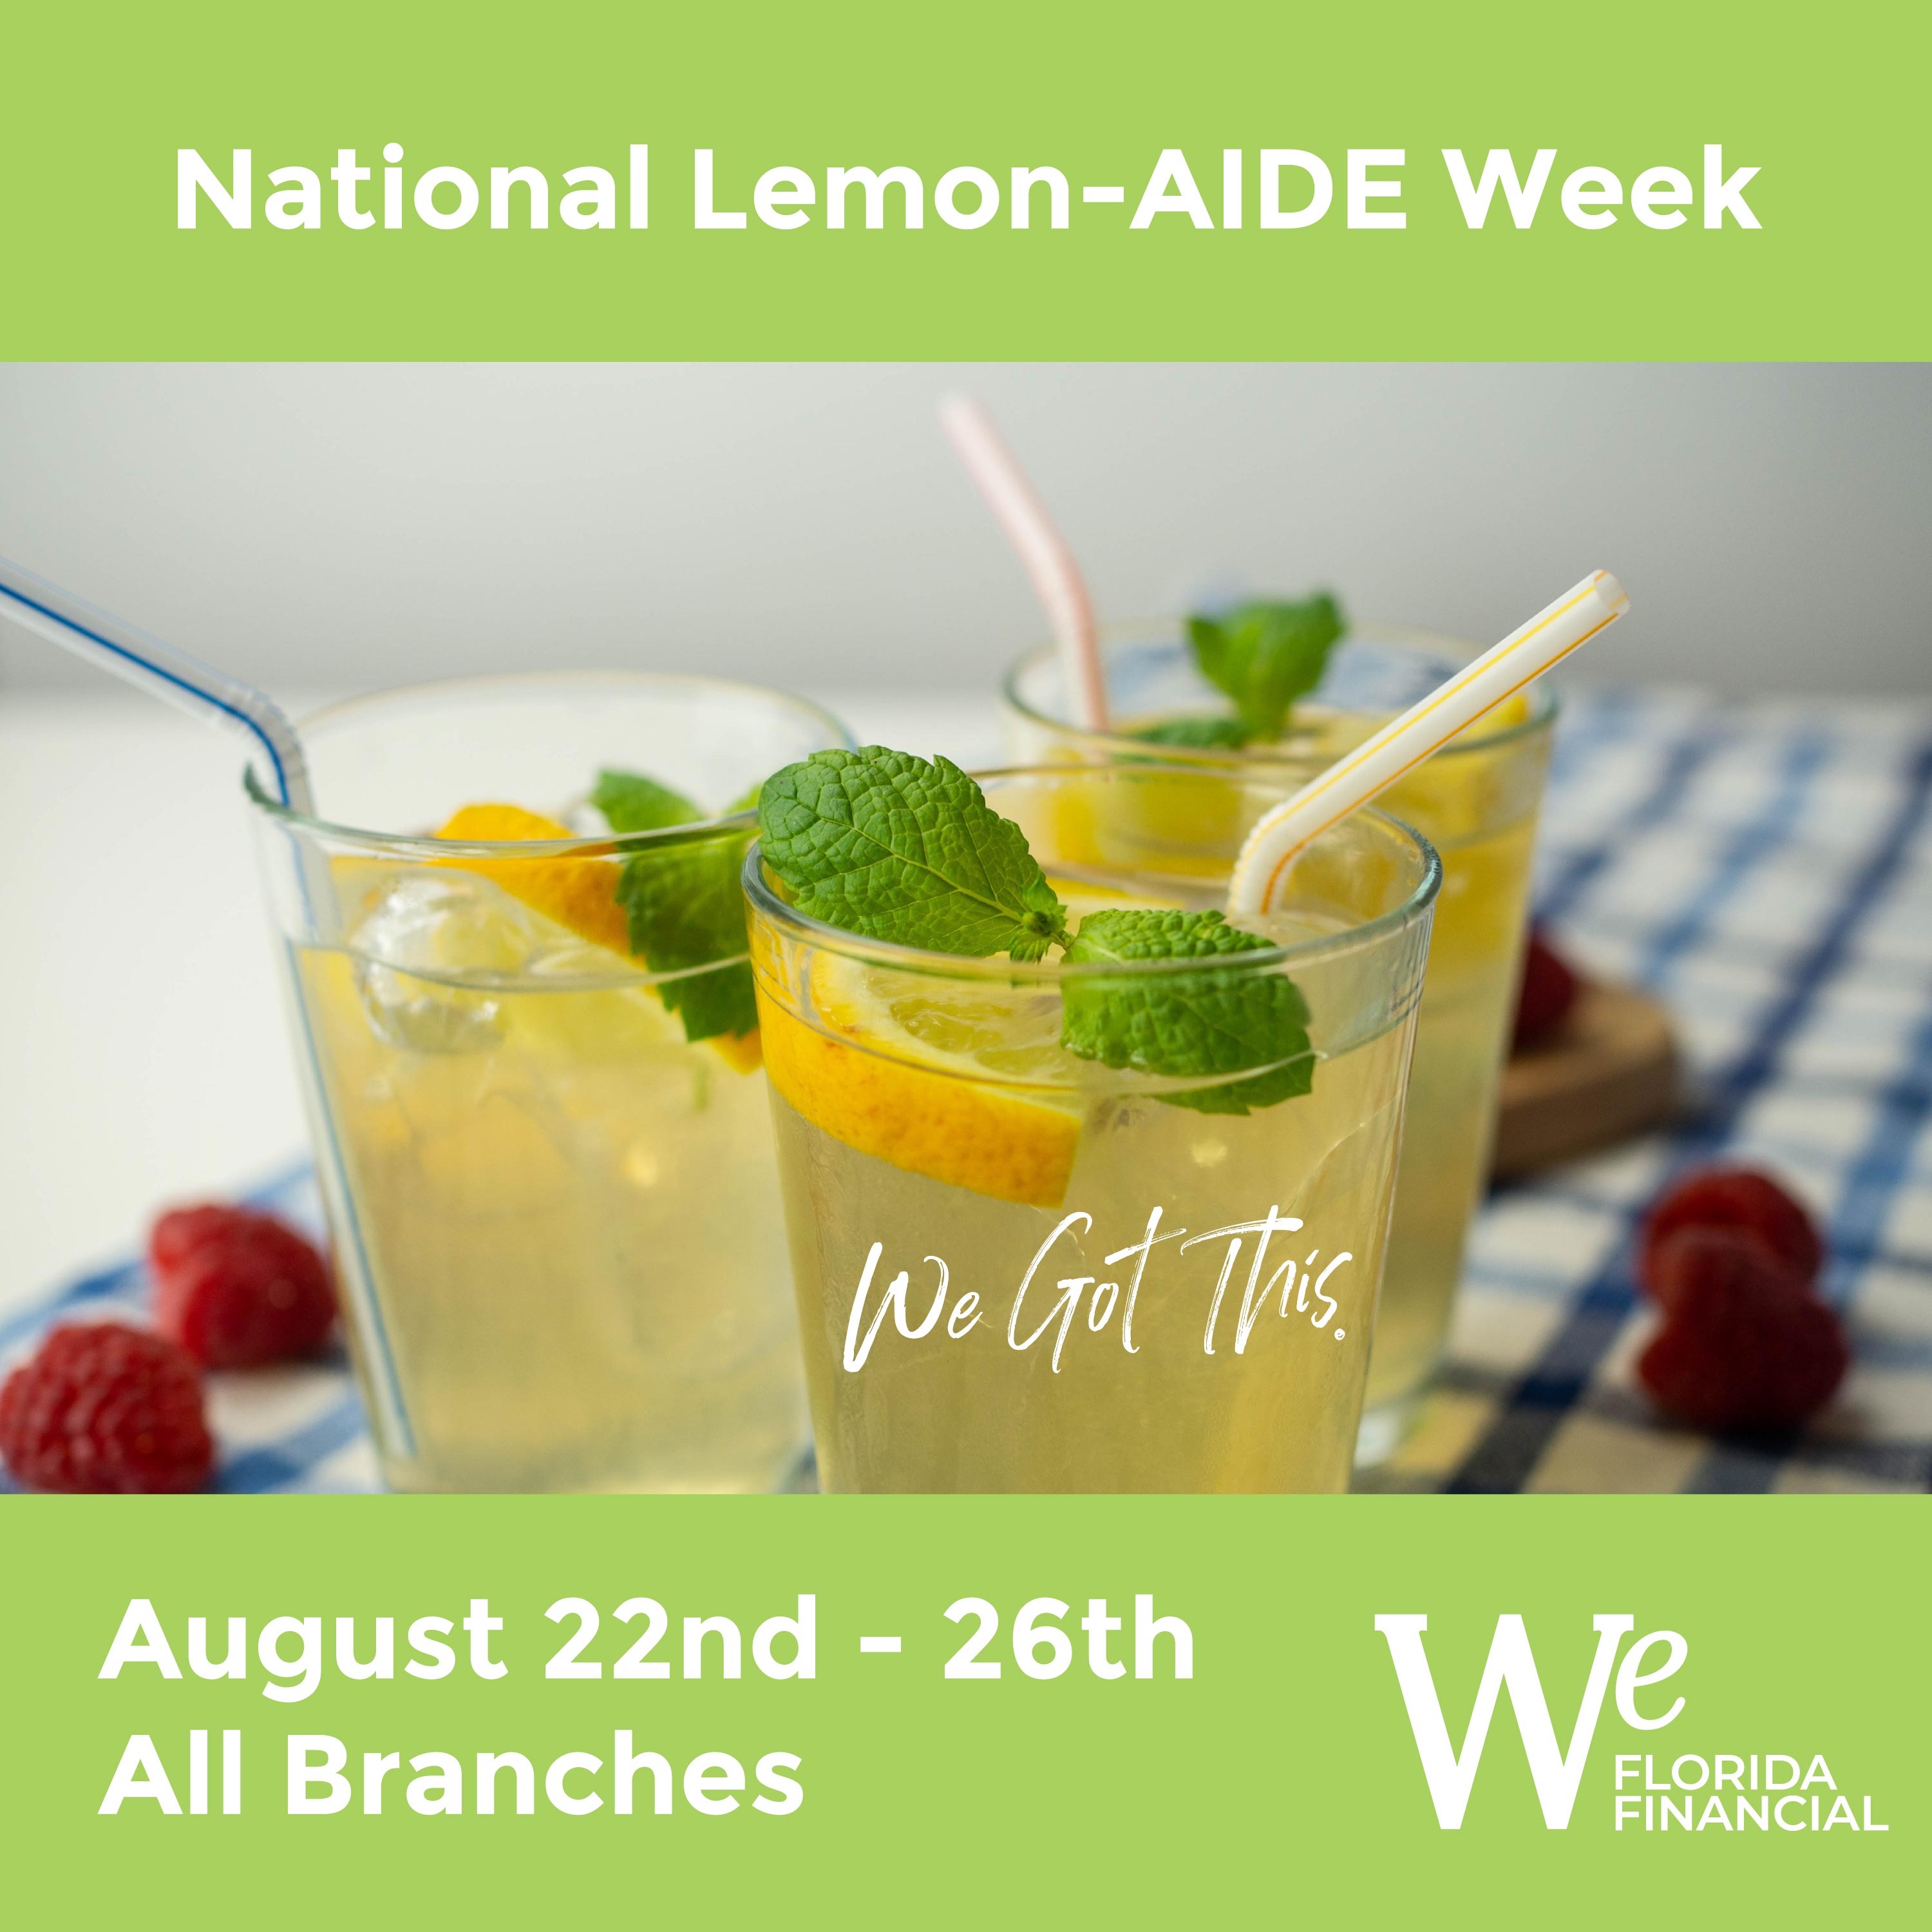 National Lemon-AIDE week  August 22nd - 26th  at all branches